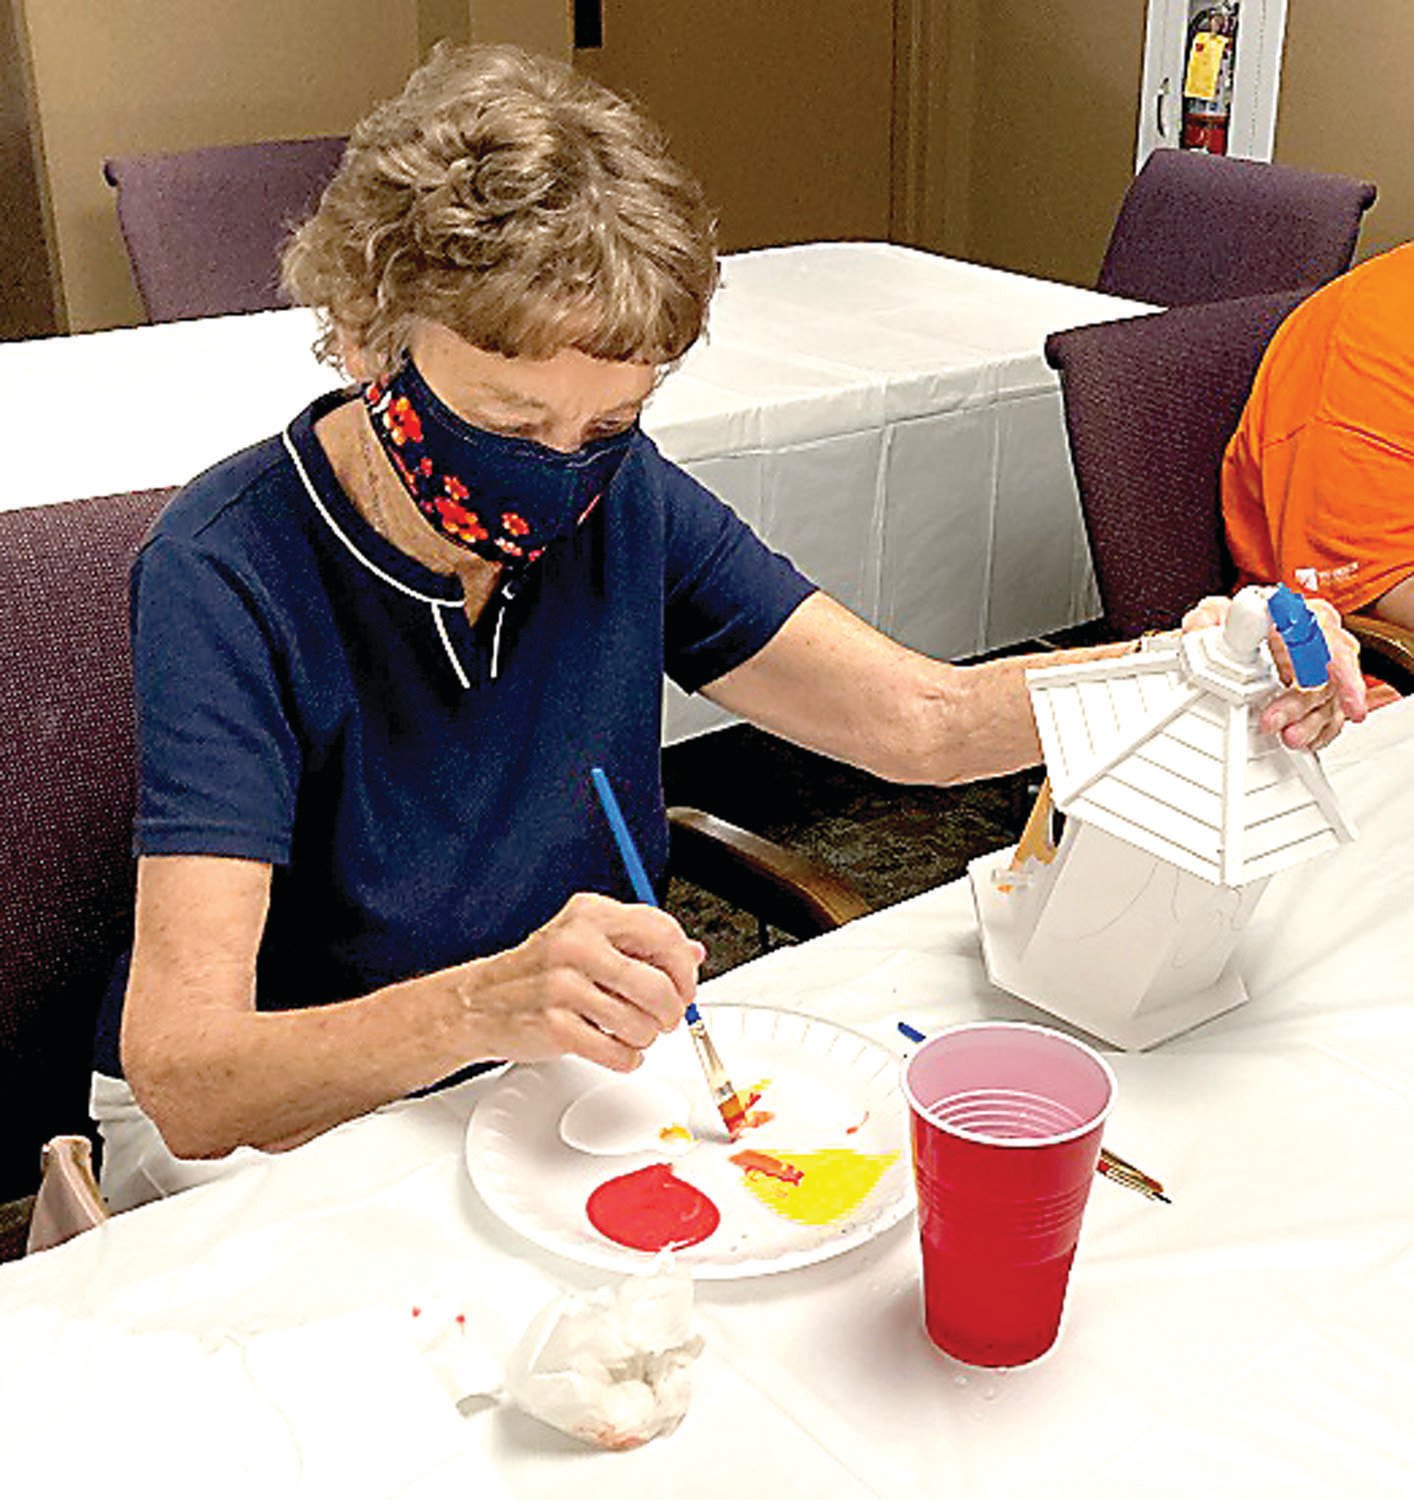 A participant in the “Creative Painting, Design a Summertime Birdhouse” workshop, presented by visiting artist Antoinette Marchfelder as part of the 2021 Summer Education Series for Lifelong Learning.